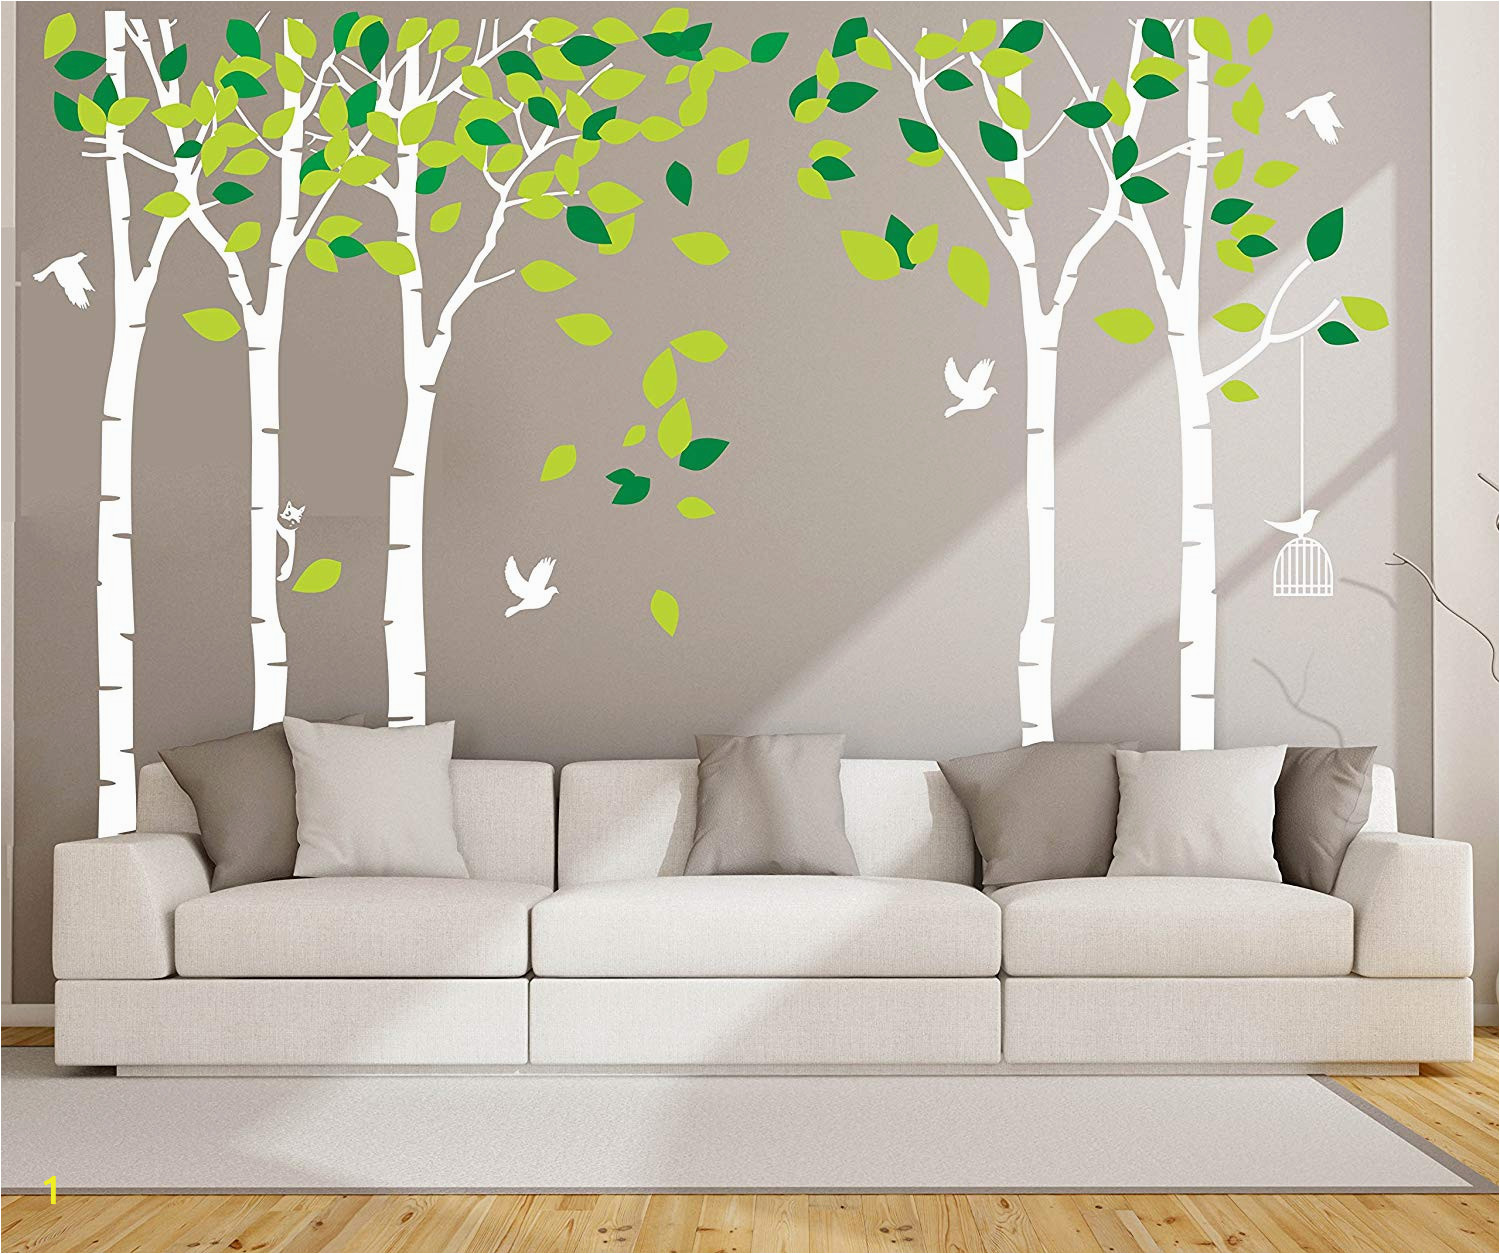 Jungle Book Wall Mural Anber Giant Jungle Tree Wall Decal Removable Vinyl Sticker Mural Art Bedroom Nursery Baby Kids Rooms Wall Décor